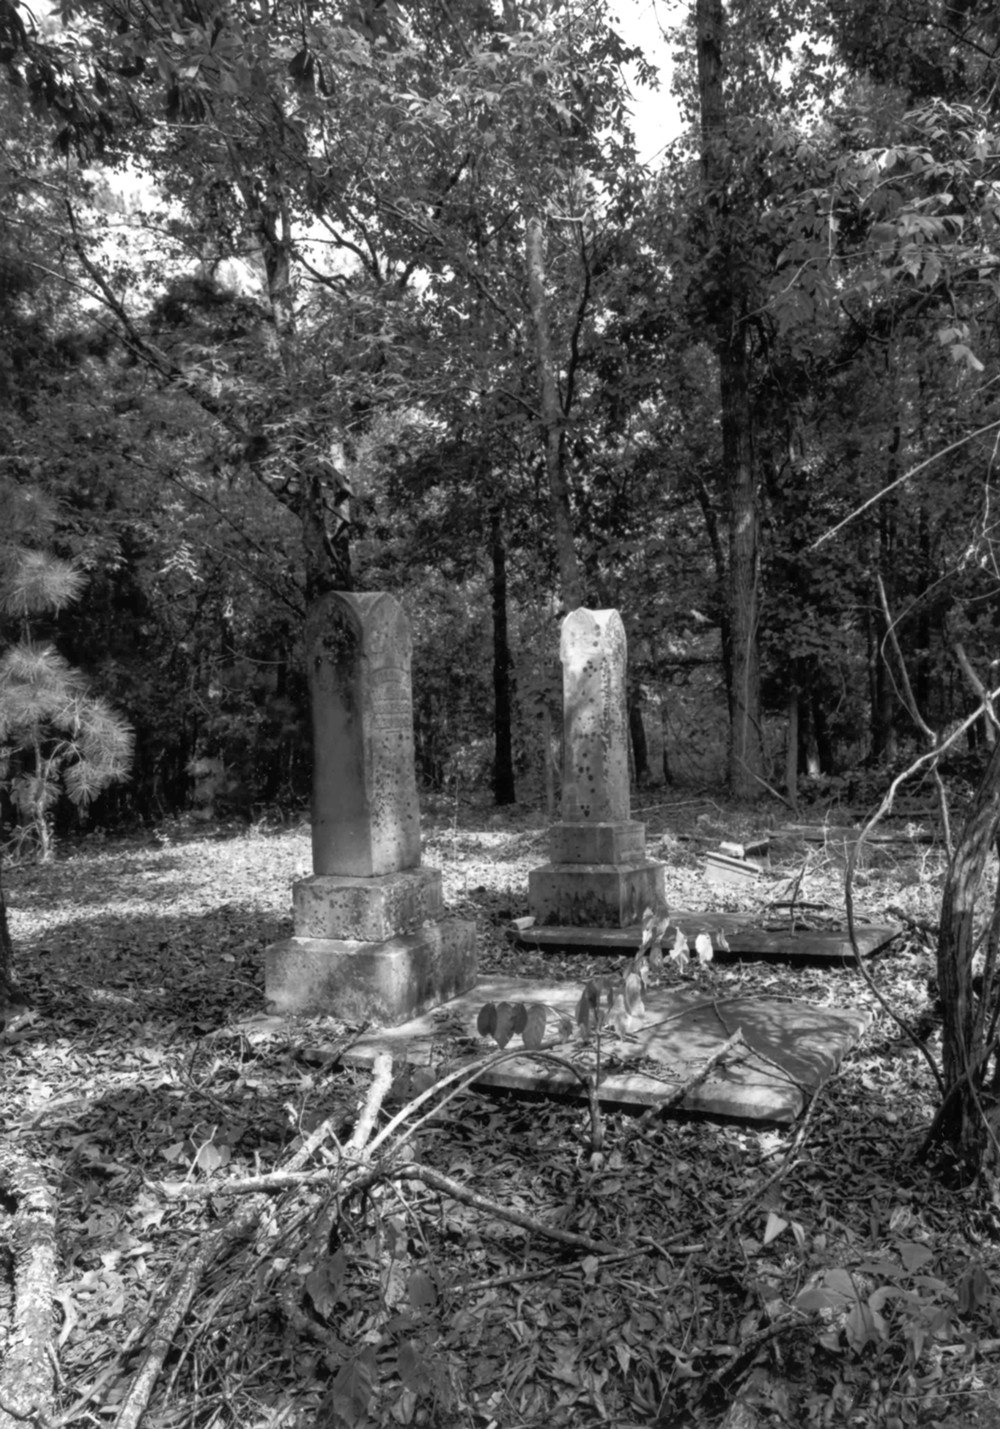 Thornton Plantation, Pine Mountain Georgia Mullins Cemetery, two marble obelisks in a row of burials, south side of the cemetery looking northwest. (2002)